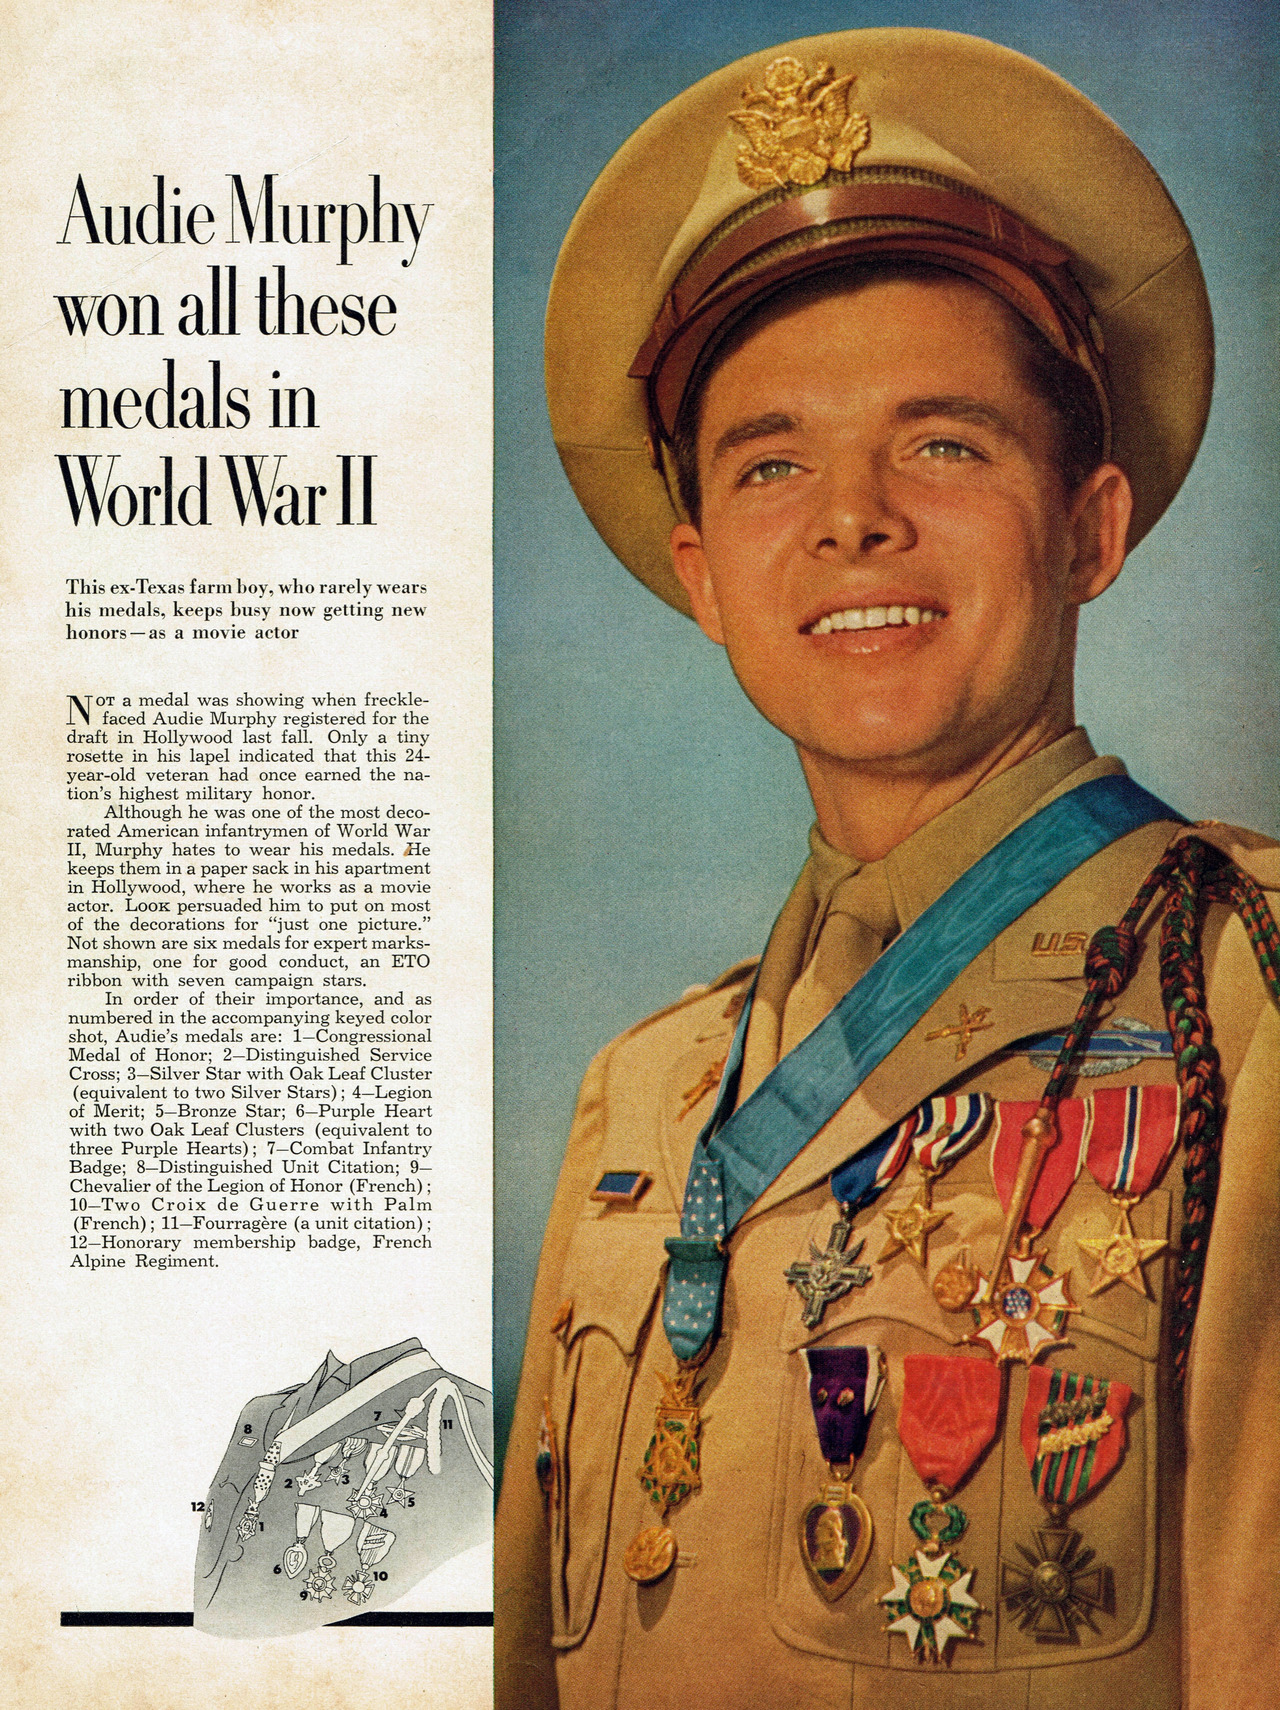 audie-murphy-images